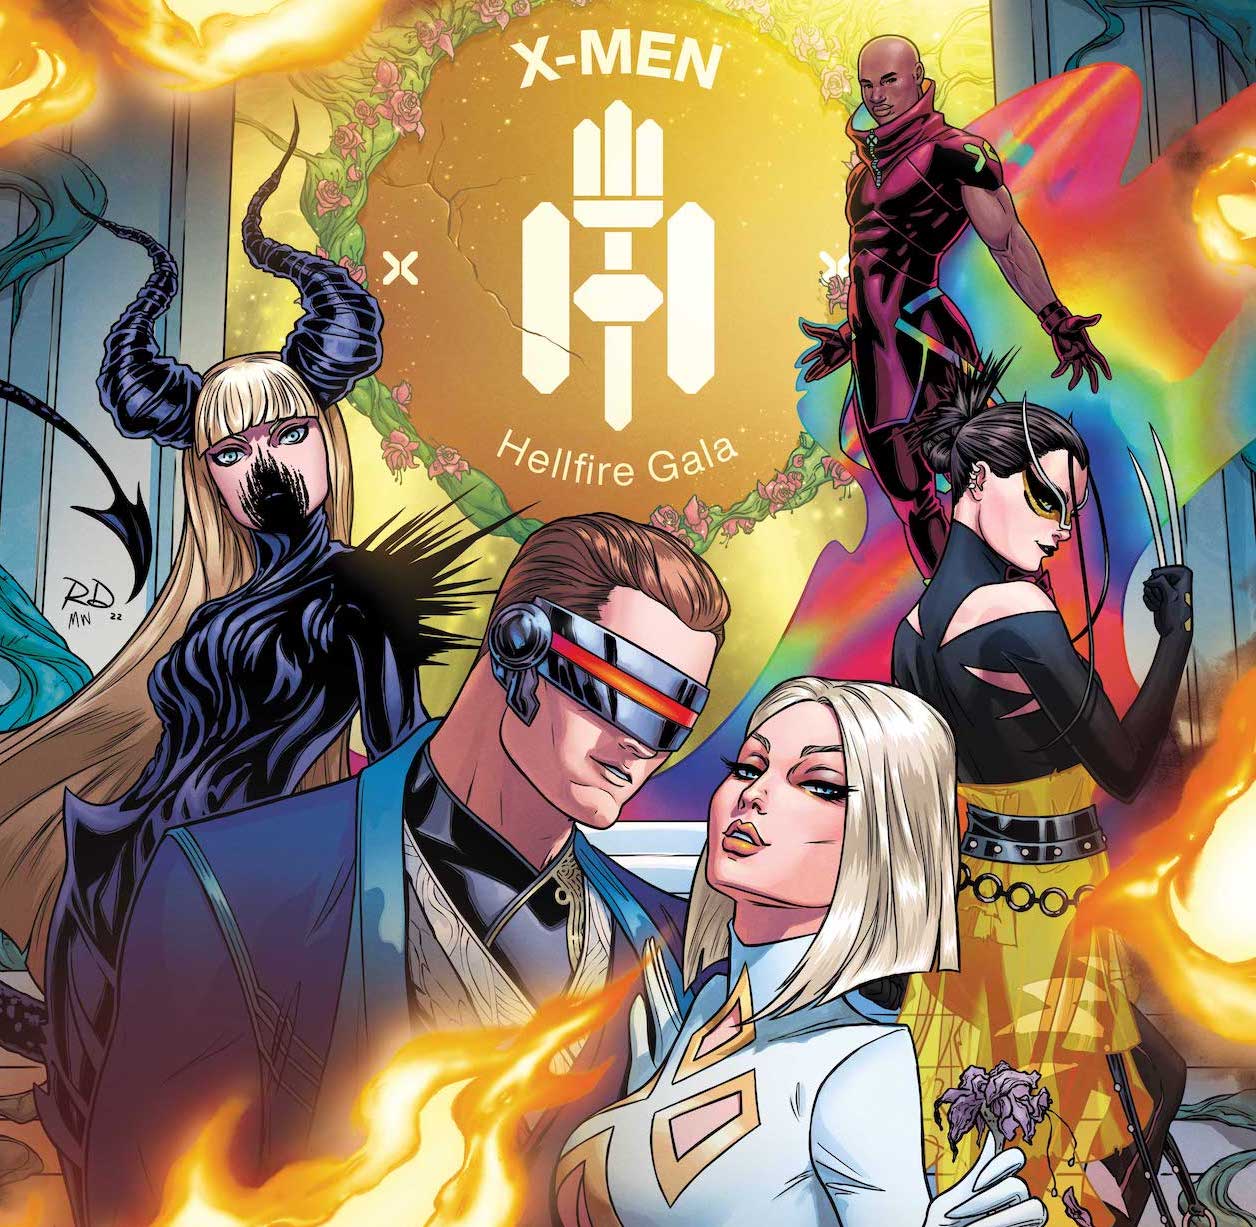 'X-Men: Hellfire Gala' #1 is an impactful, character-focused special